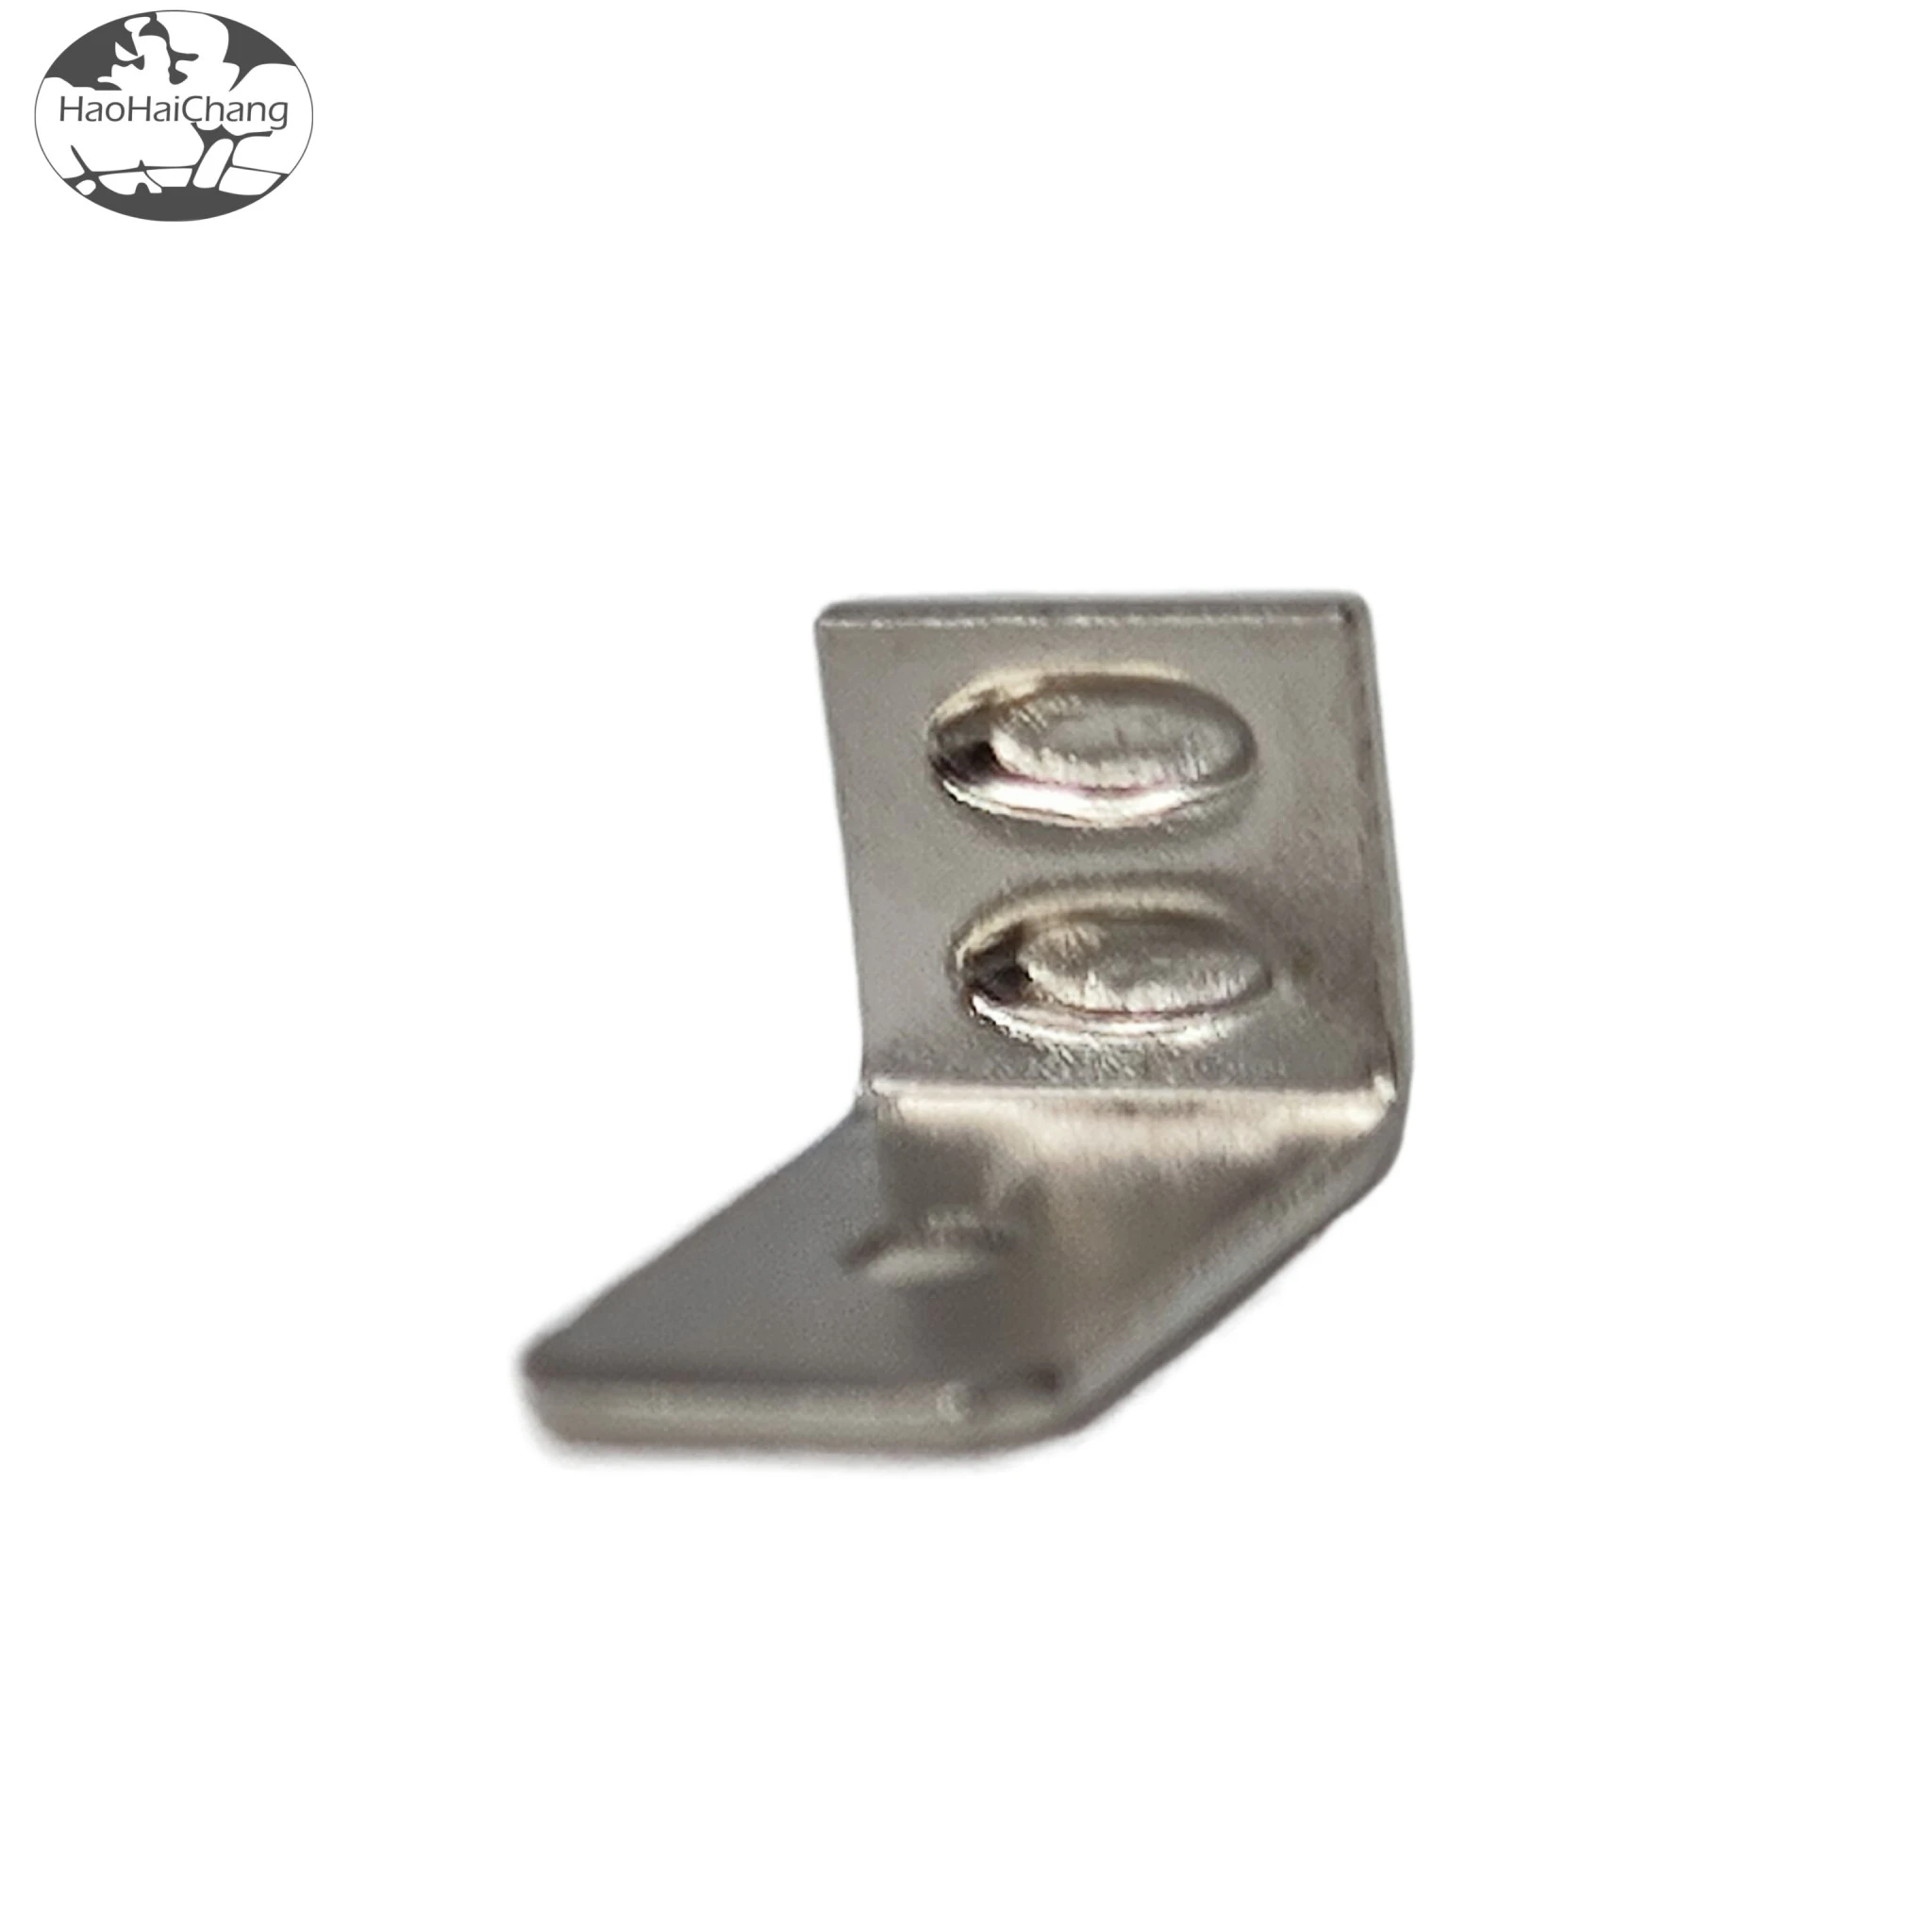 HHC-0140 Connector